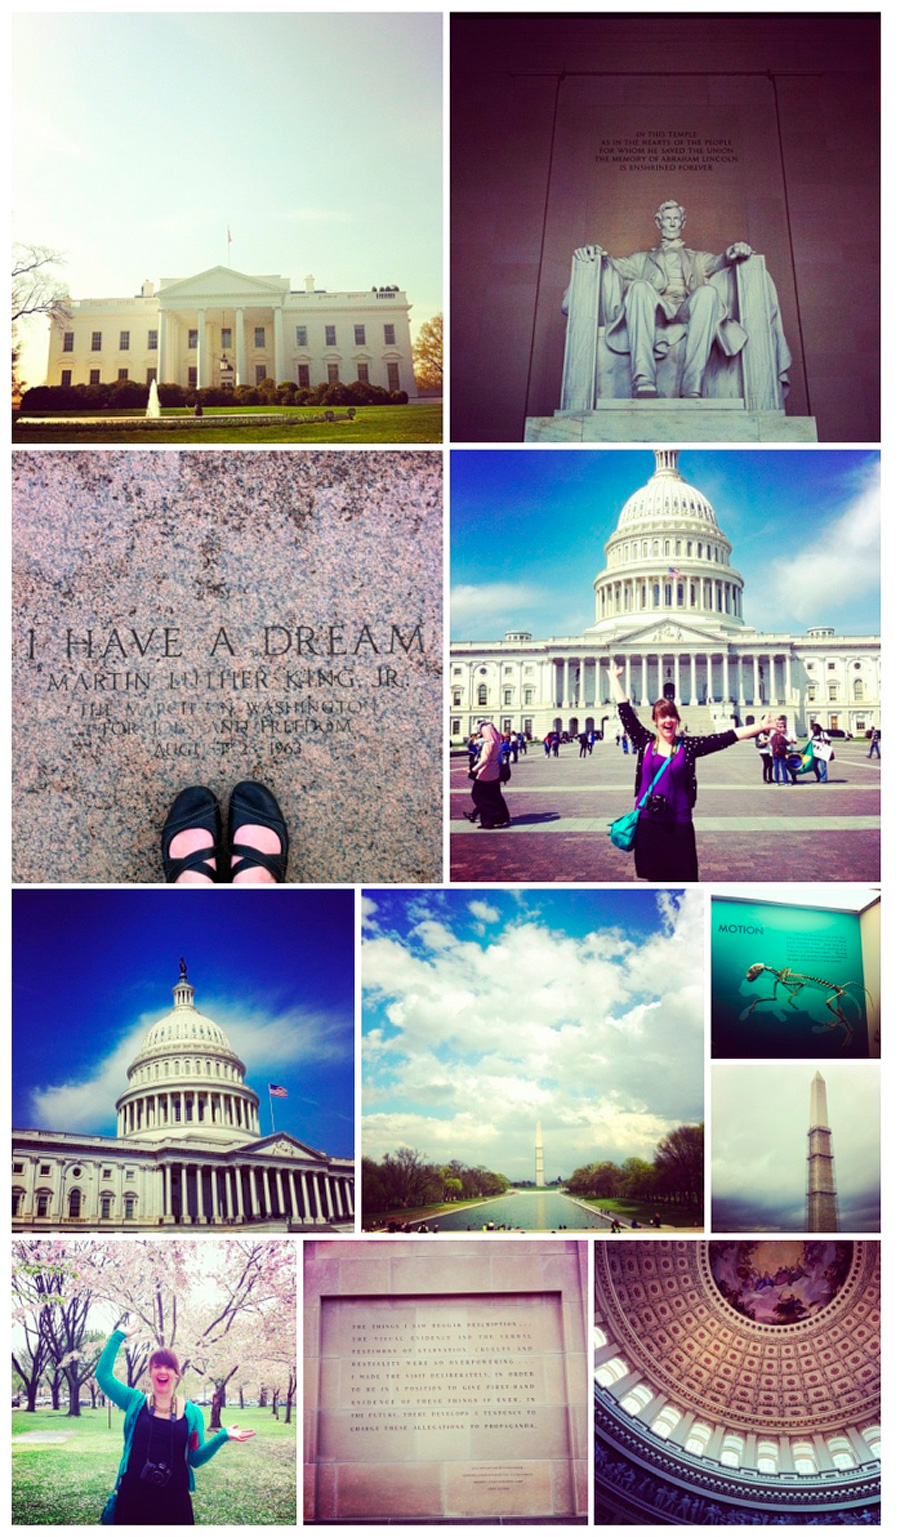 I went to DC in April with my Mom, which was one of the best trips of my life. We saw the White House, the Lincoln Memorial, I stood where Martin Luther King gave his "I Have a Dream" speech, took a tour of the Capitol, saw the Washington Monument, and visited a few different museums. AMAZING.